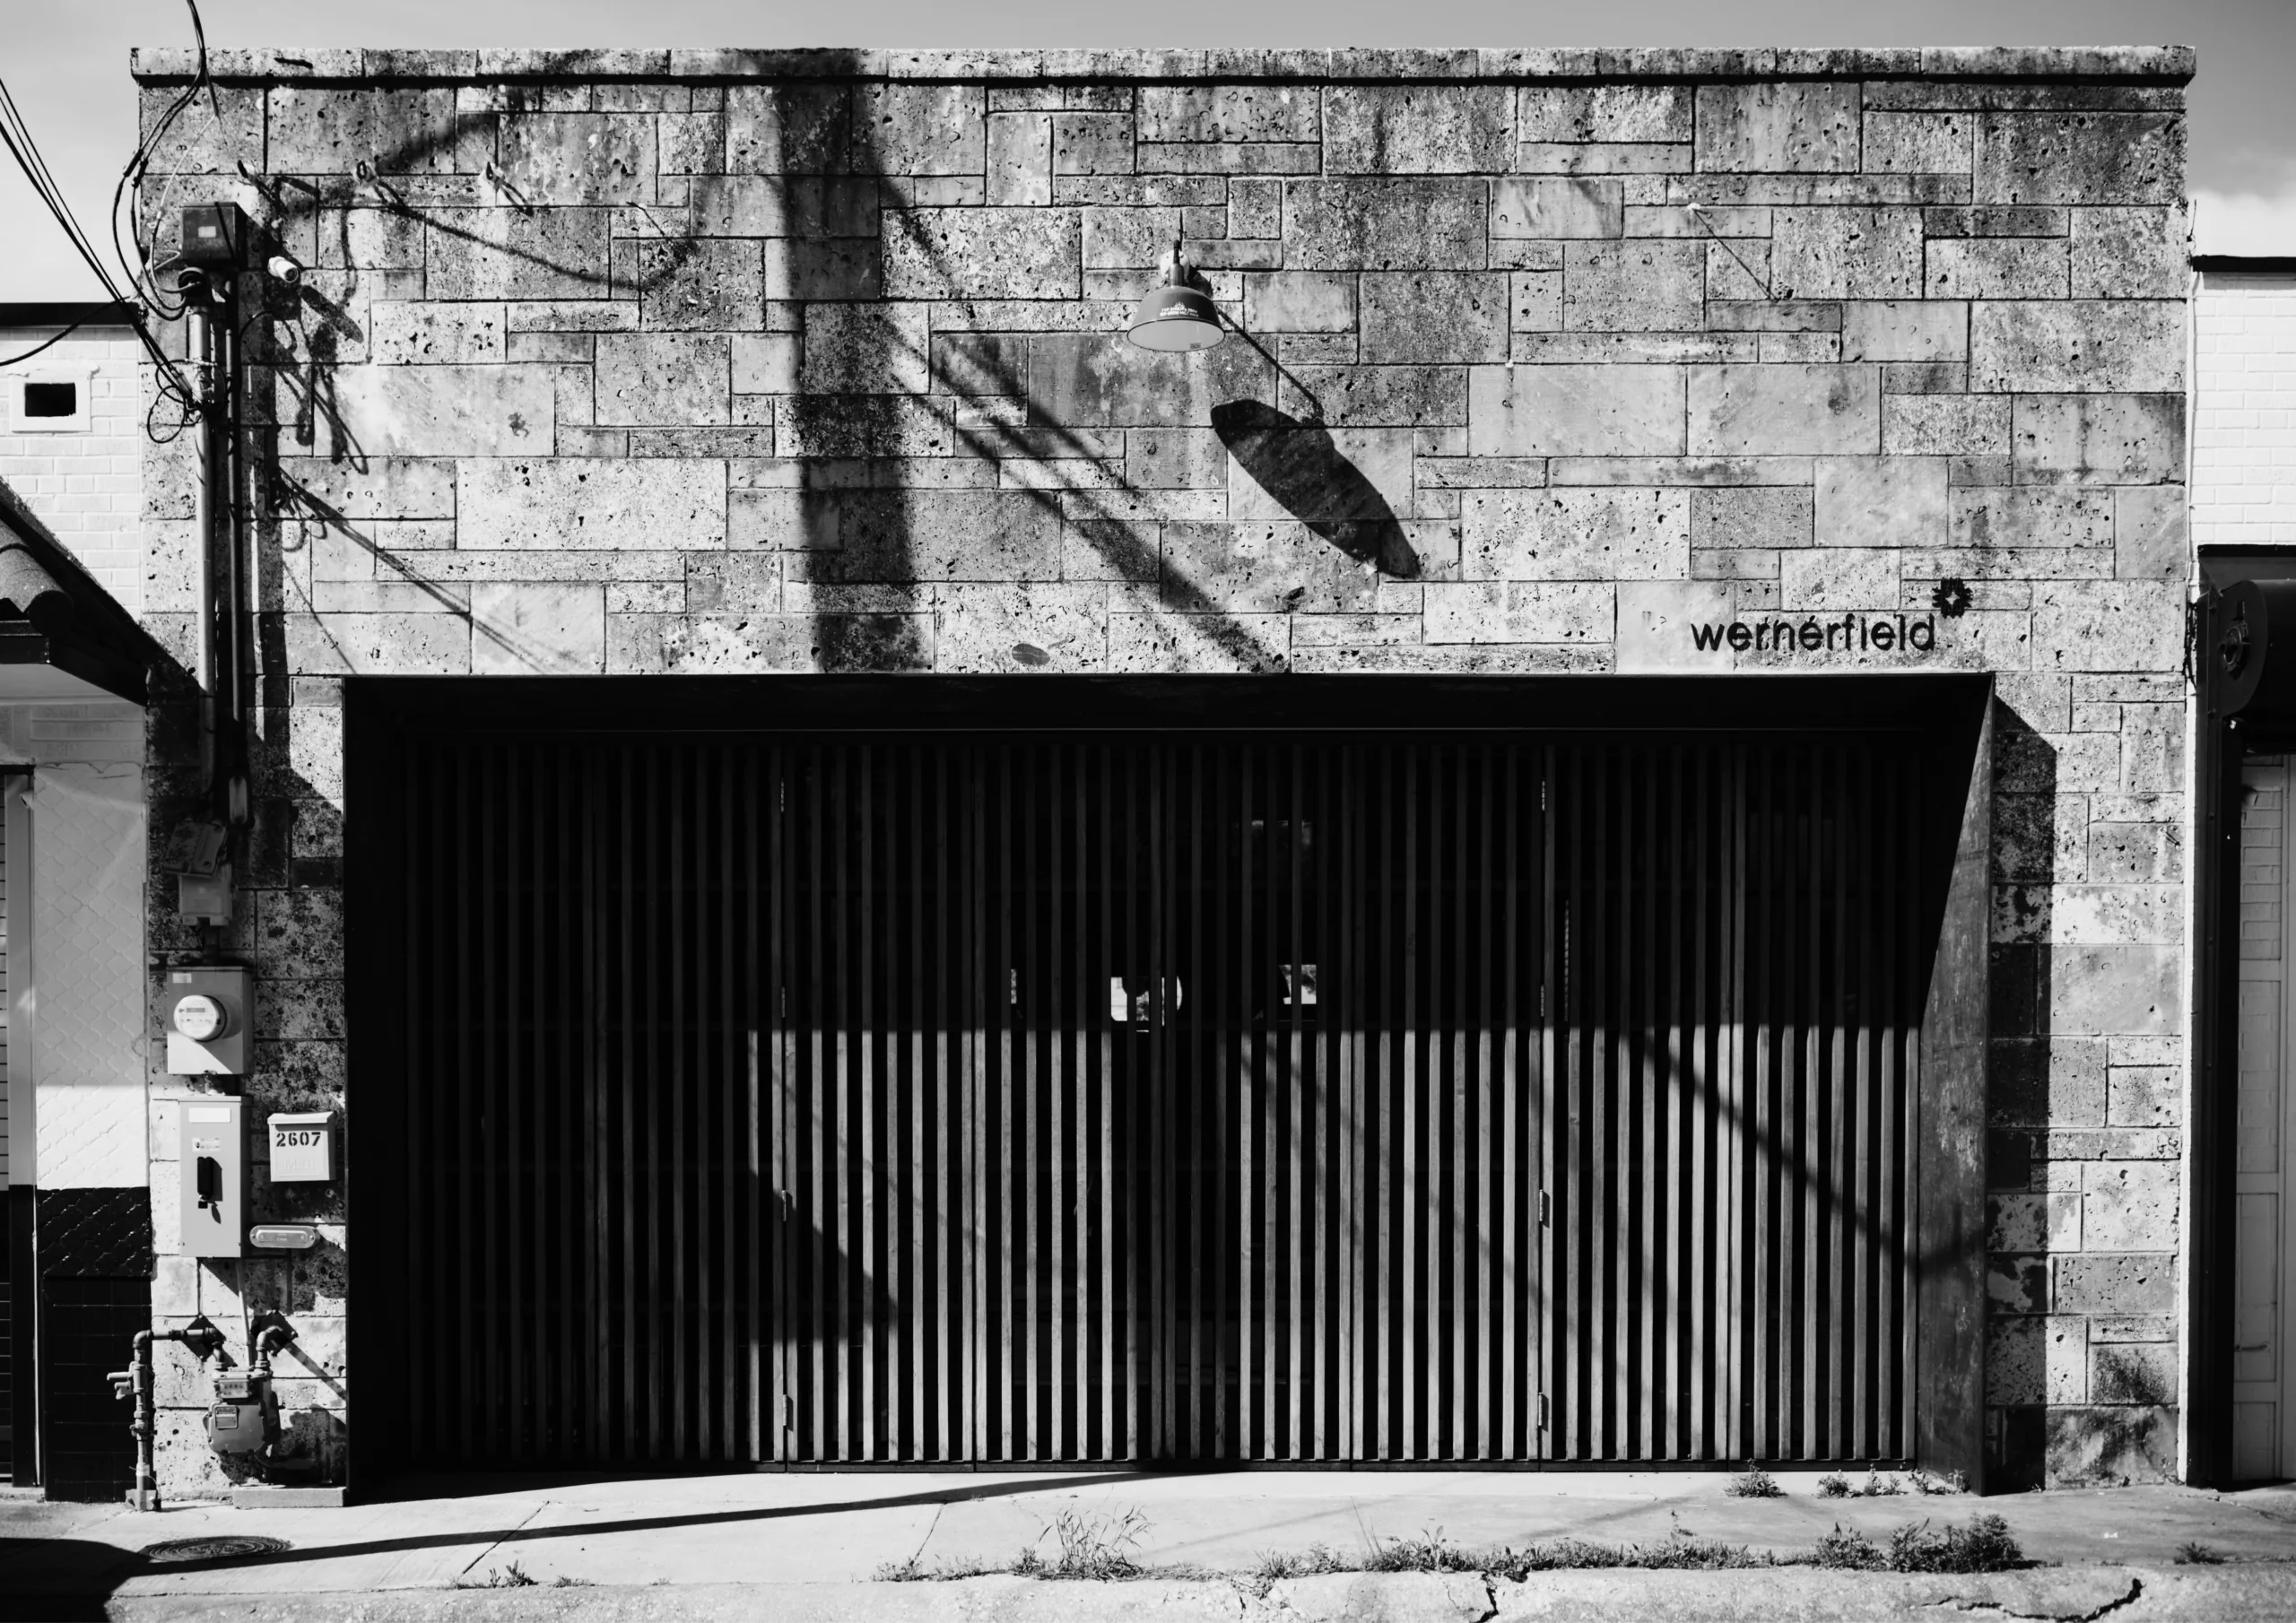 A black and white photograph of a garage door.